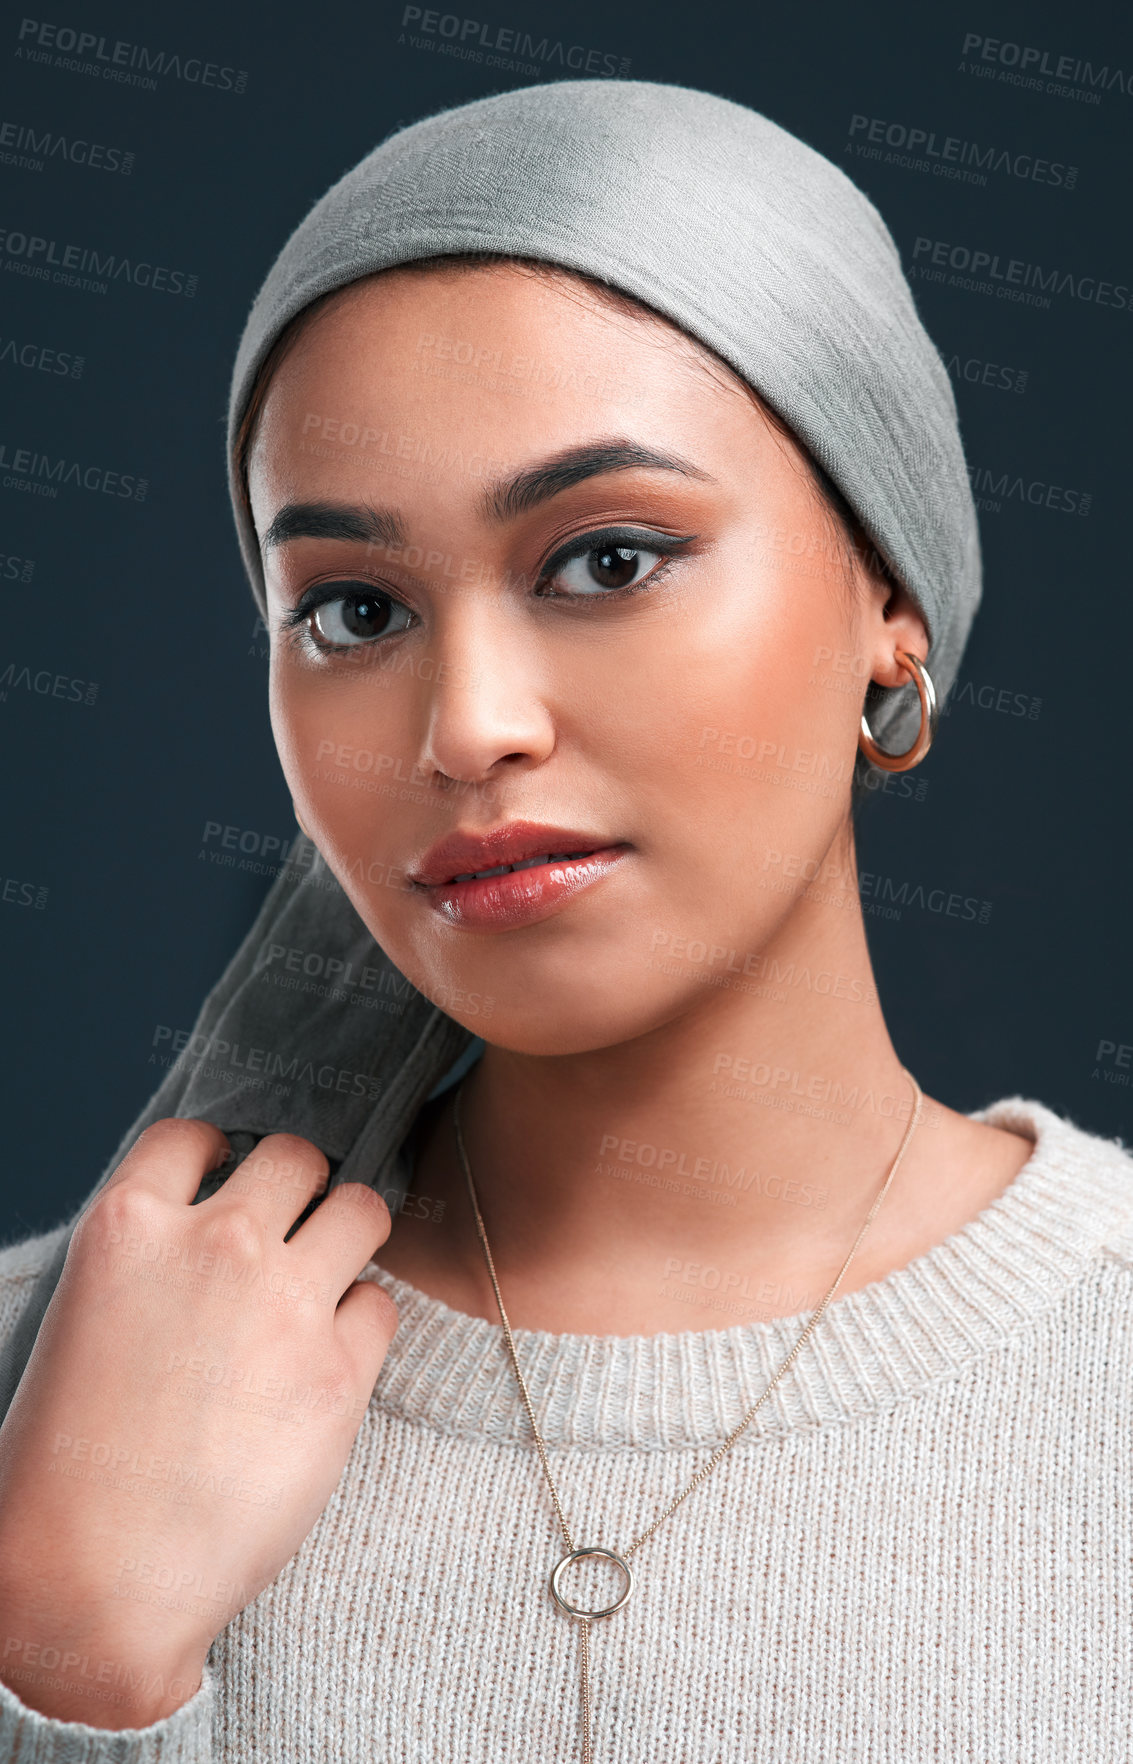 Buy stock photo Cropped shot of an attractive young woman wearing a headscarf and standing alone against a black background in the studio